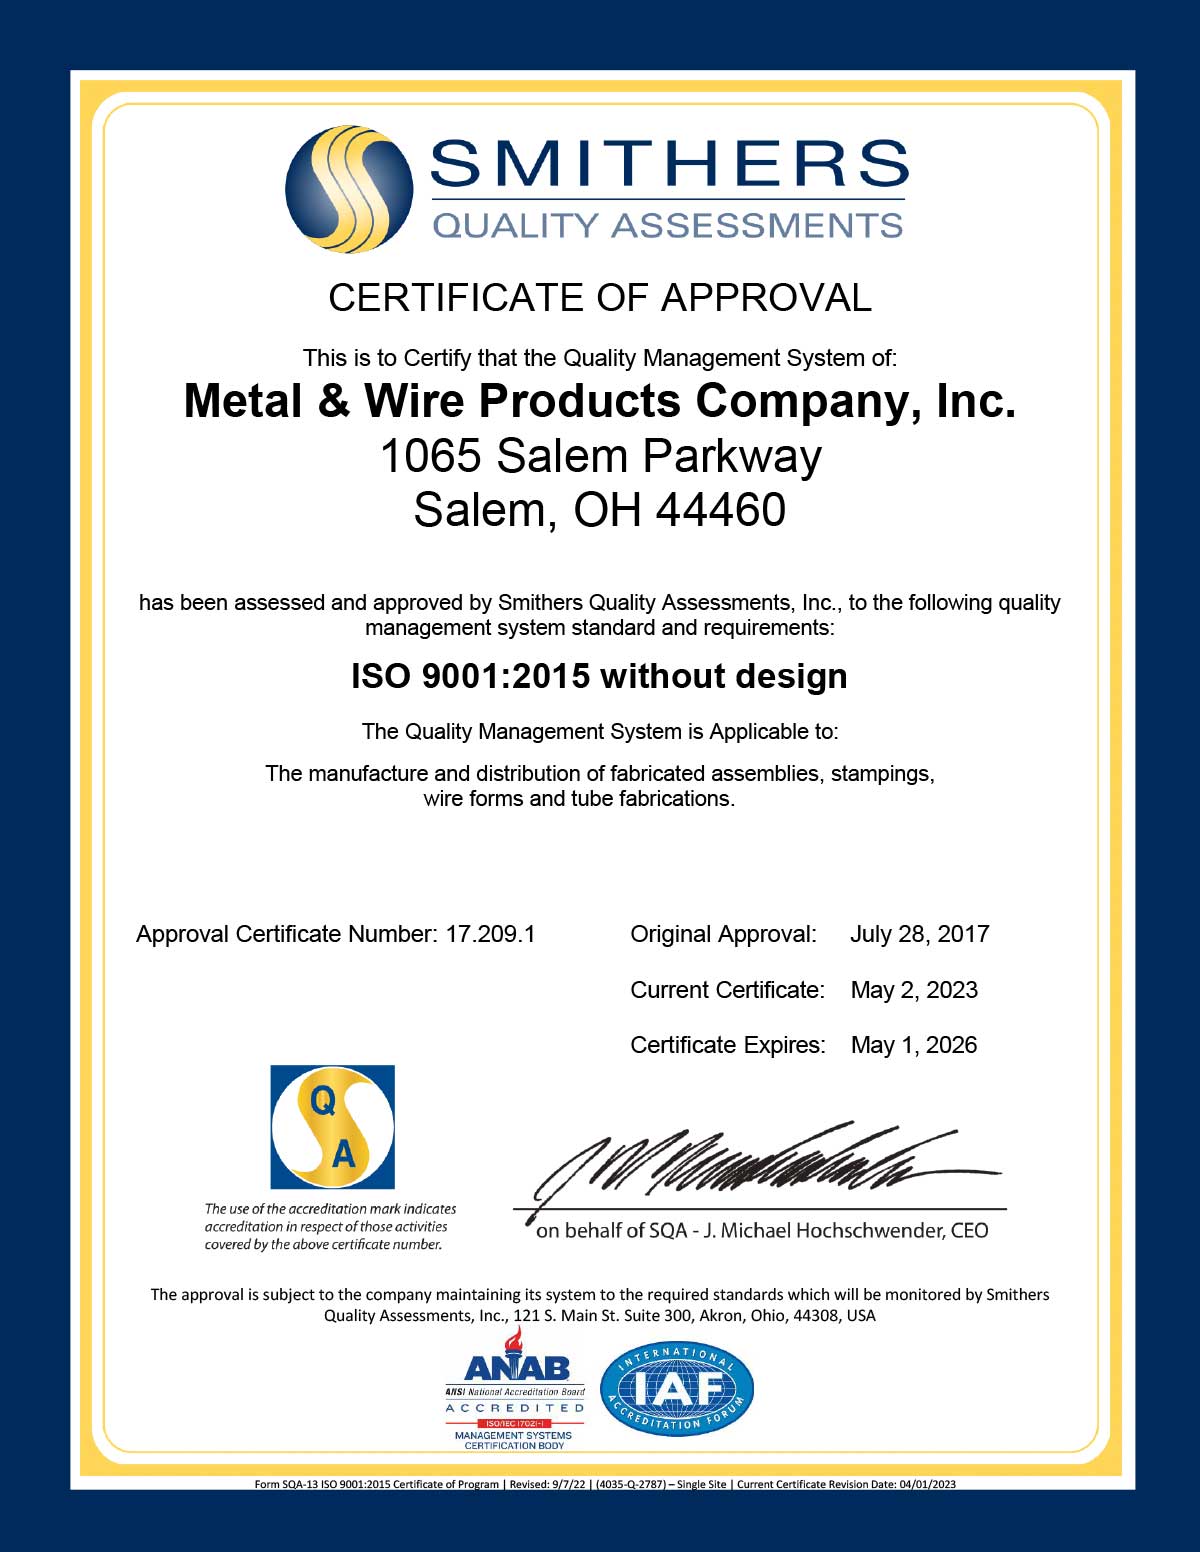 Smithers Quality management ISO 9001